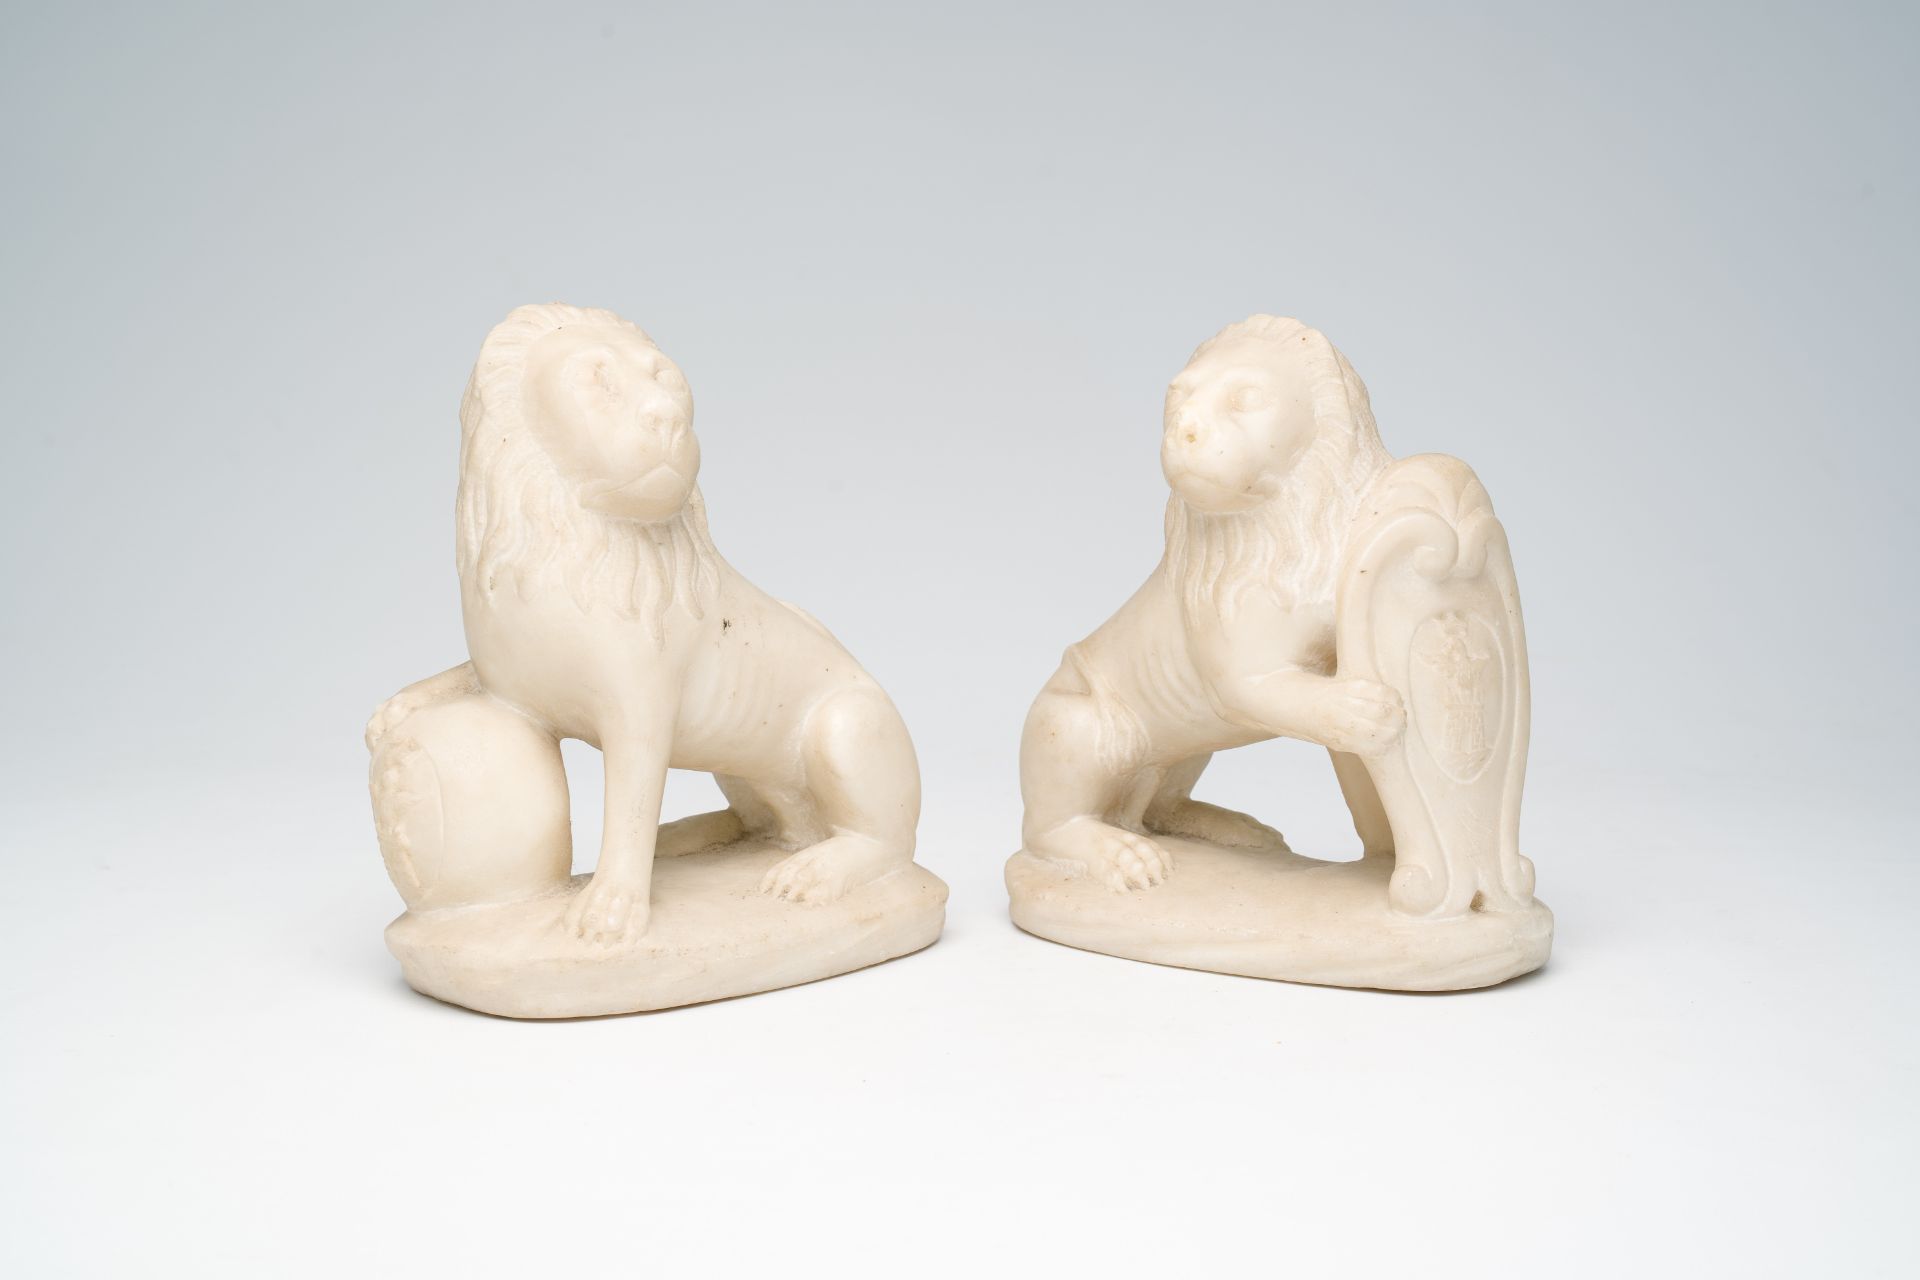 A pair of Italian marble lions holding shields with coats of arms, 19th C.